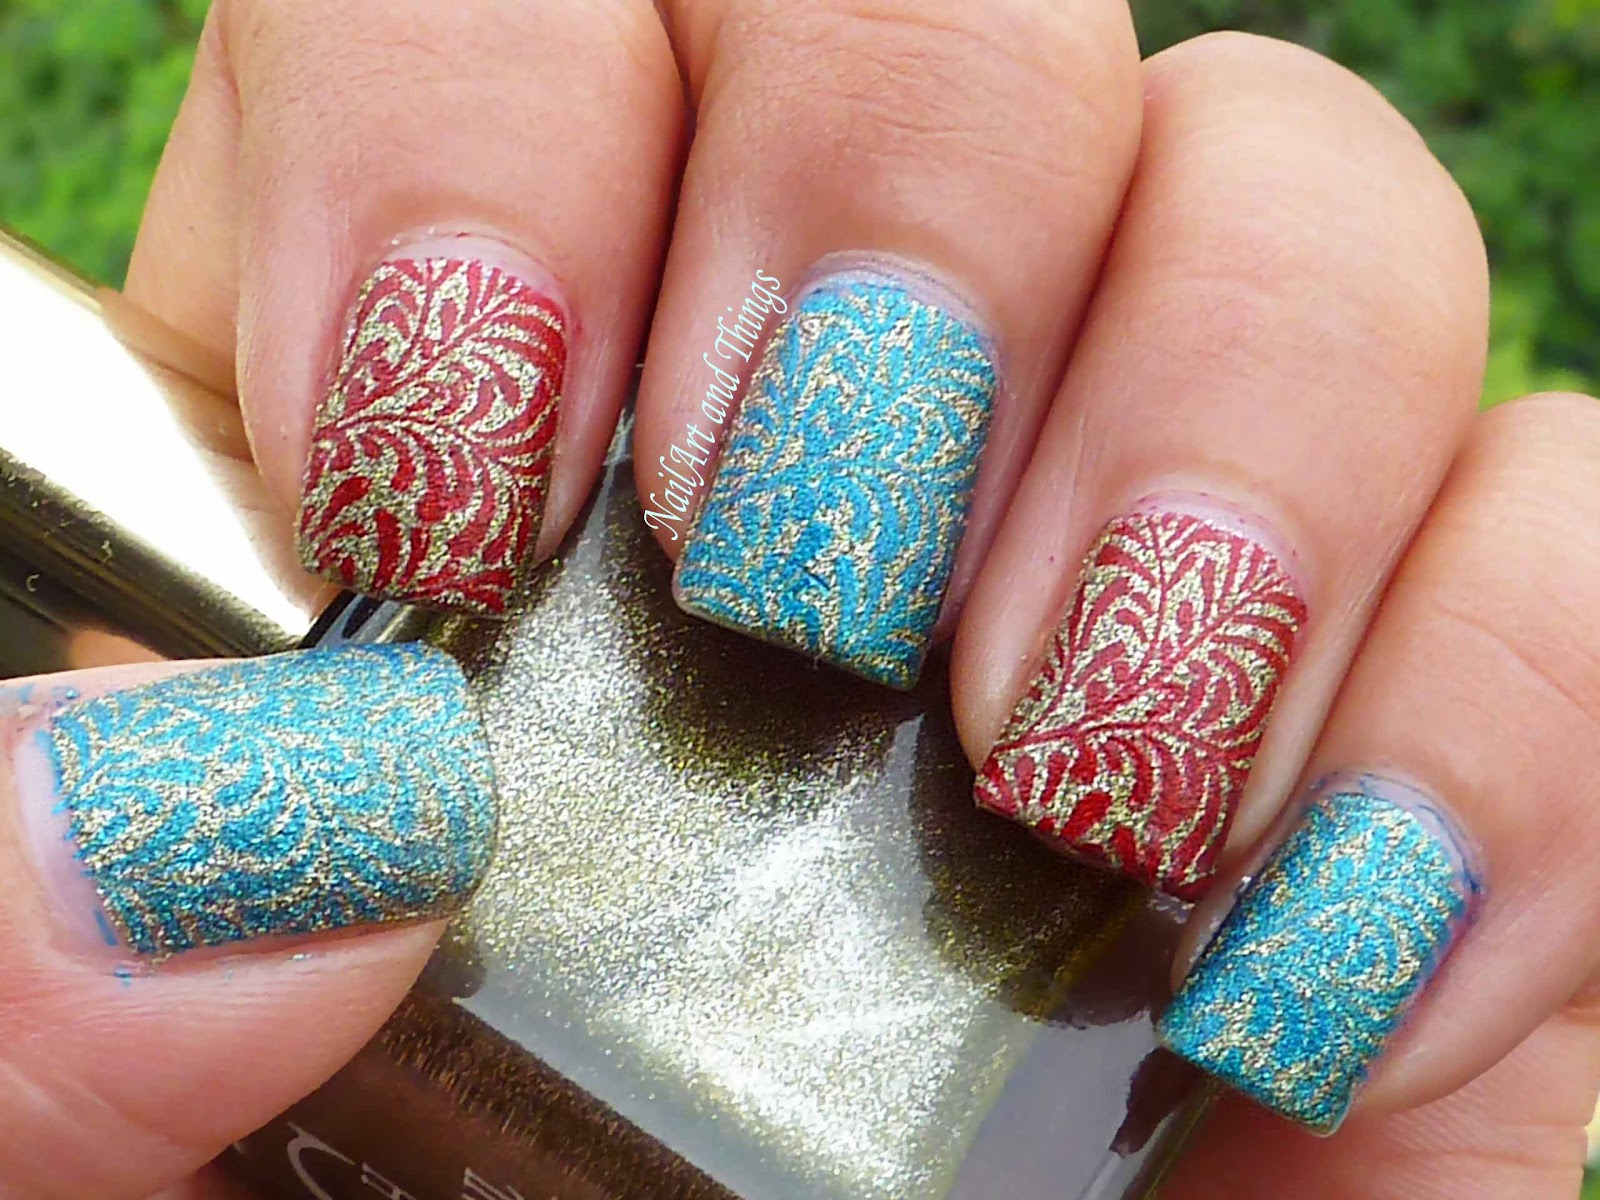 9. Layered Stamping Nail Art Designs for Short Nails - wide 3